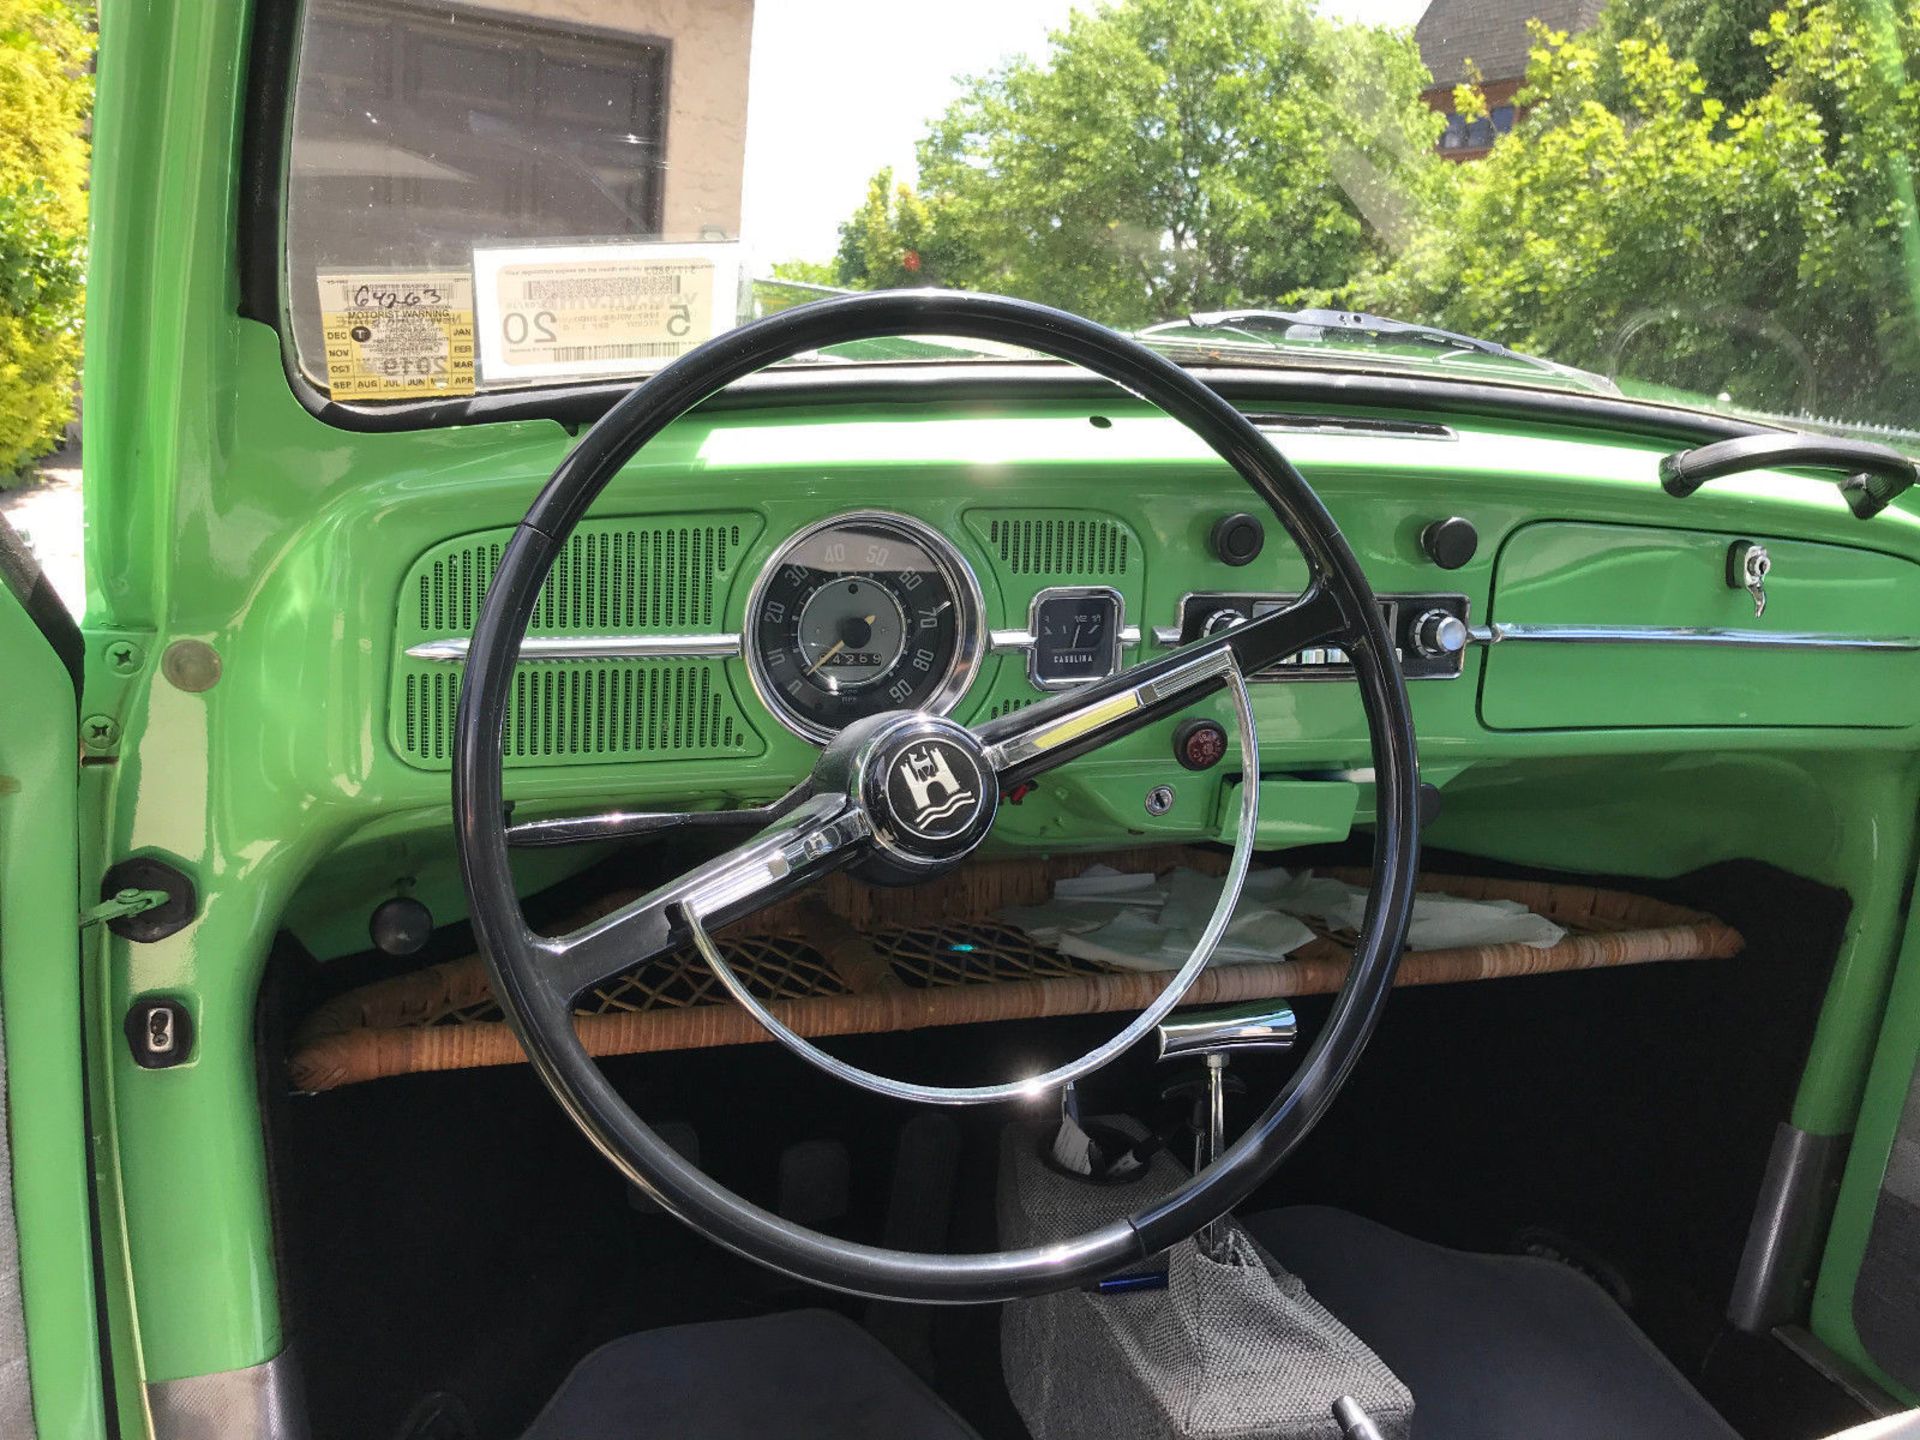 1967 Volkswagen Beetle - Classic, BRAND NEW INTERIOR, VERY COLLECTIBLE, BEATLES GREEN, LOCATION NY - Image 8 of 10